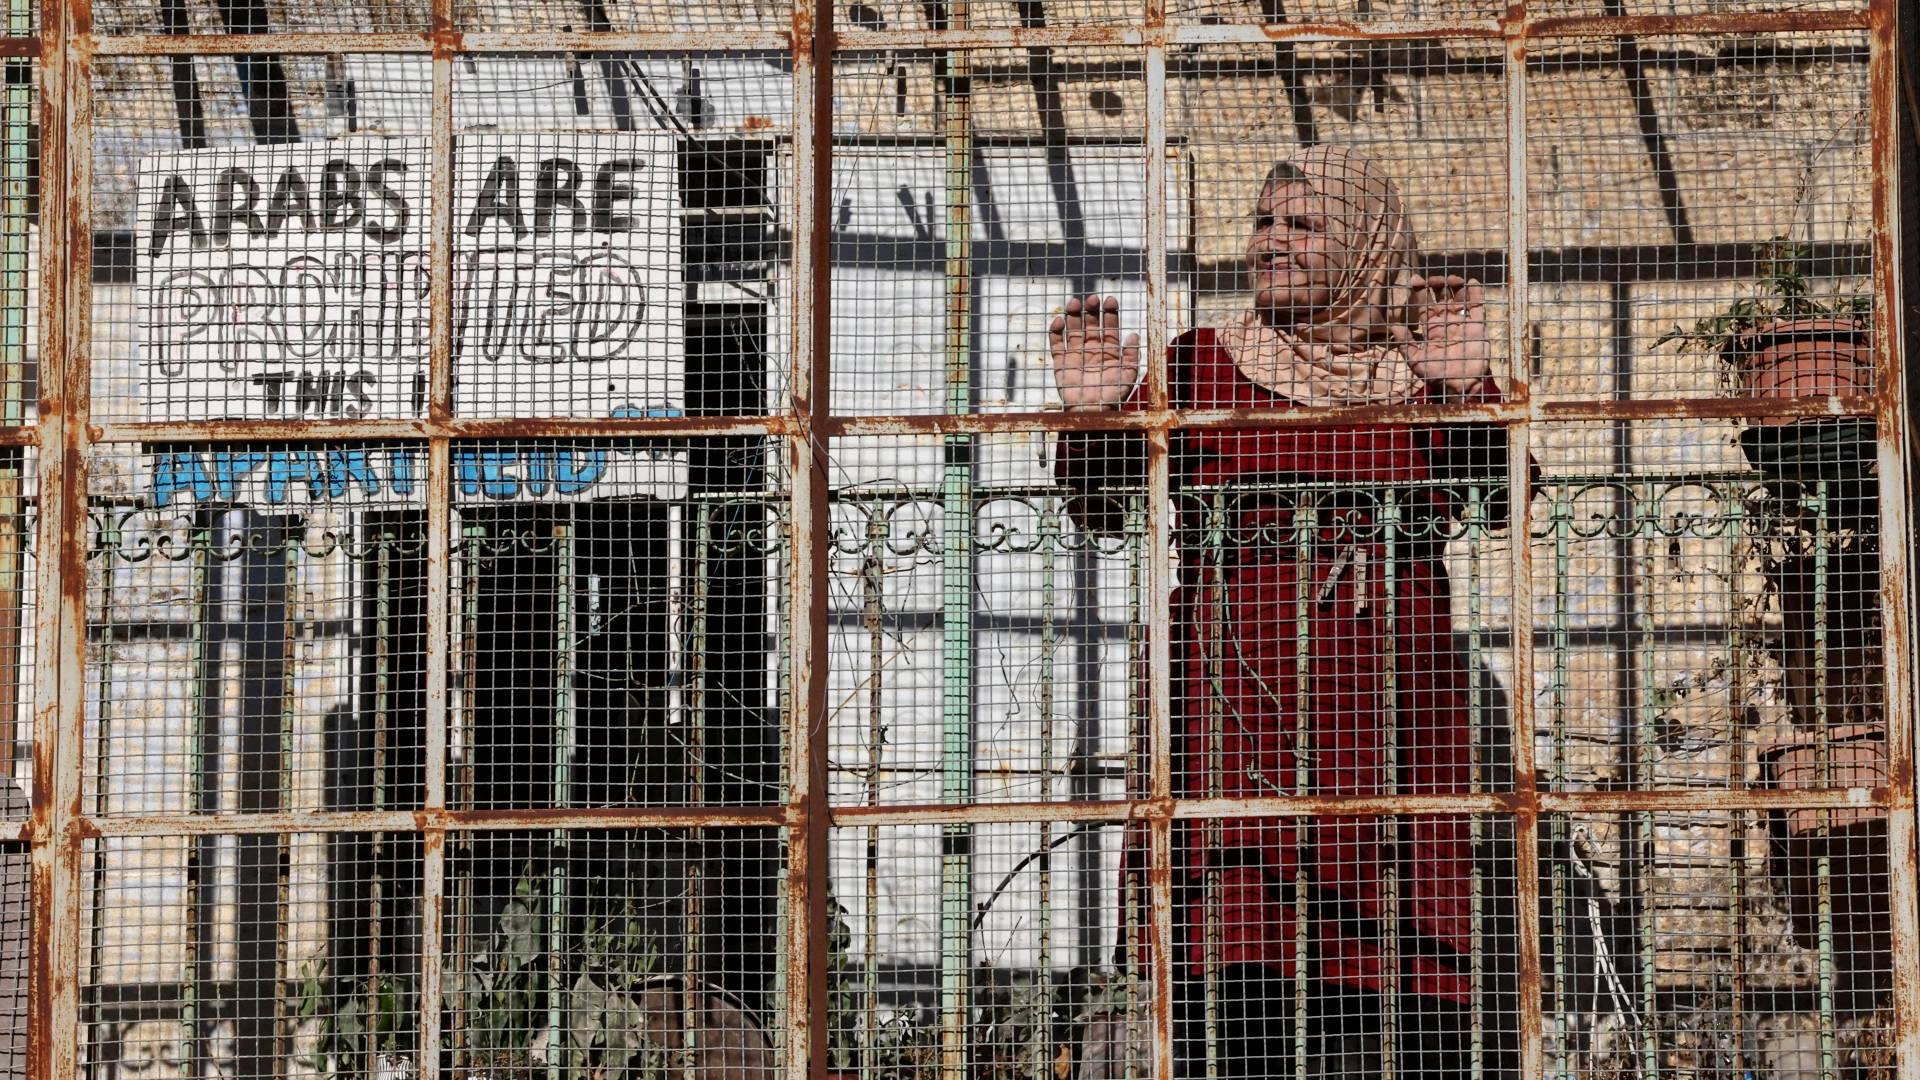 A Palestinian woman stands at the fence of her house in al-Shuhada street, which is largely closed to Palestinians, in Hebron on 9 November 2021.